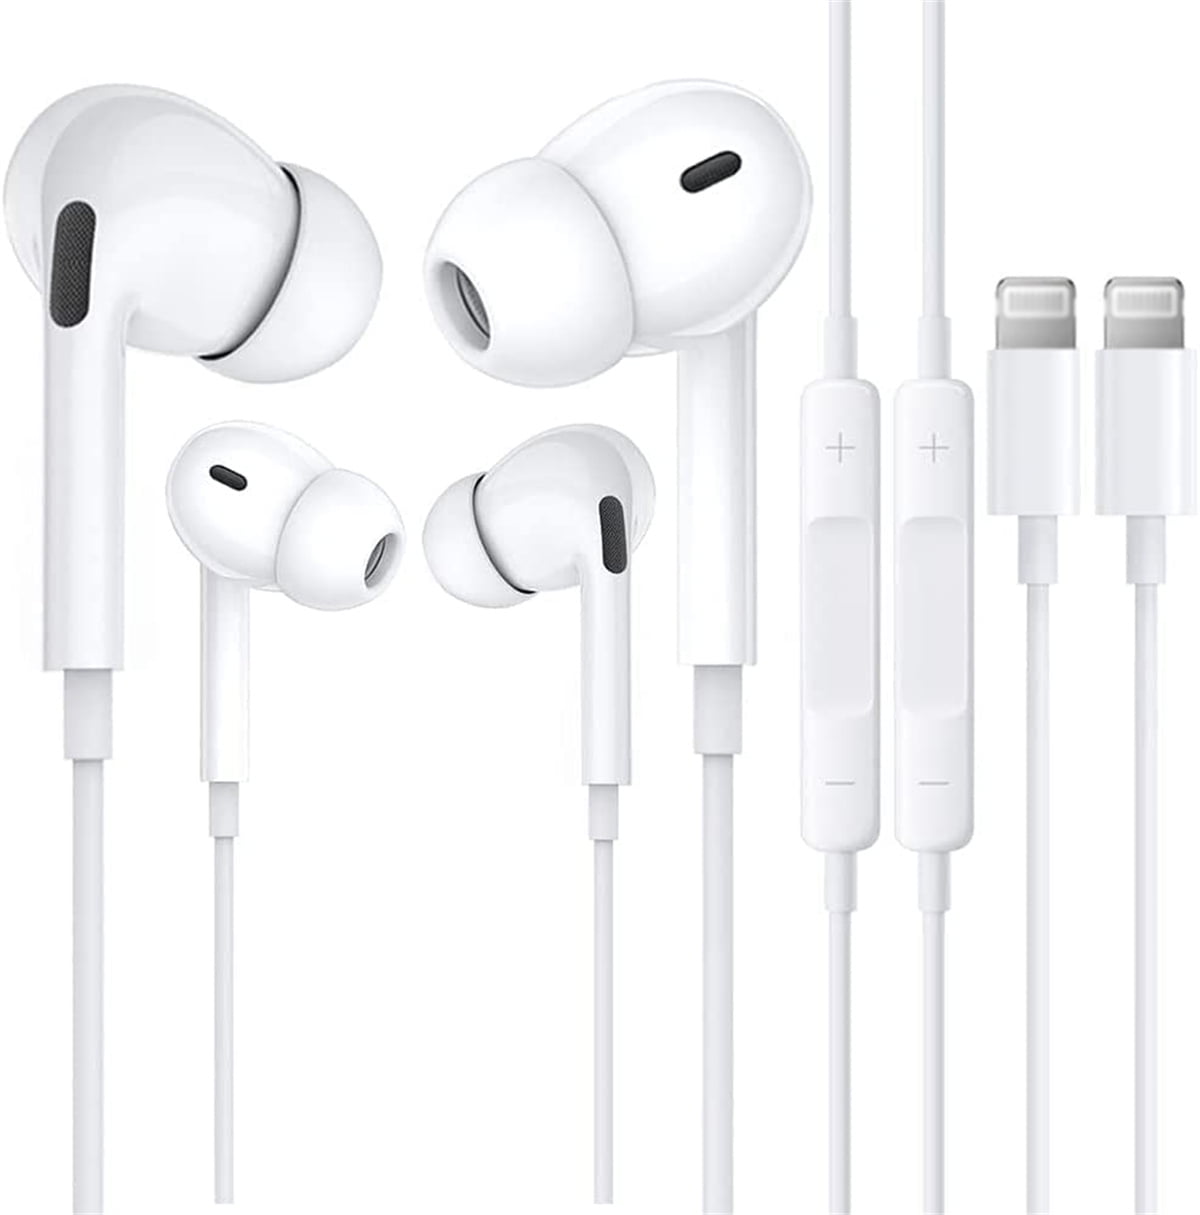 Built-in Microphone & Volume Control in-Ear Stereo Headset Compatible with iPhone 13/12/11 Pro Max/Xs Max/X/XR/7/8 Plus-All iOS Apple MFi Certified 2 Pack iPhone Earbuds Wired Lightning Headphones 